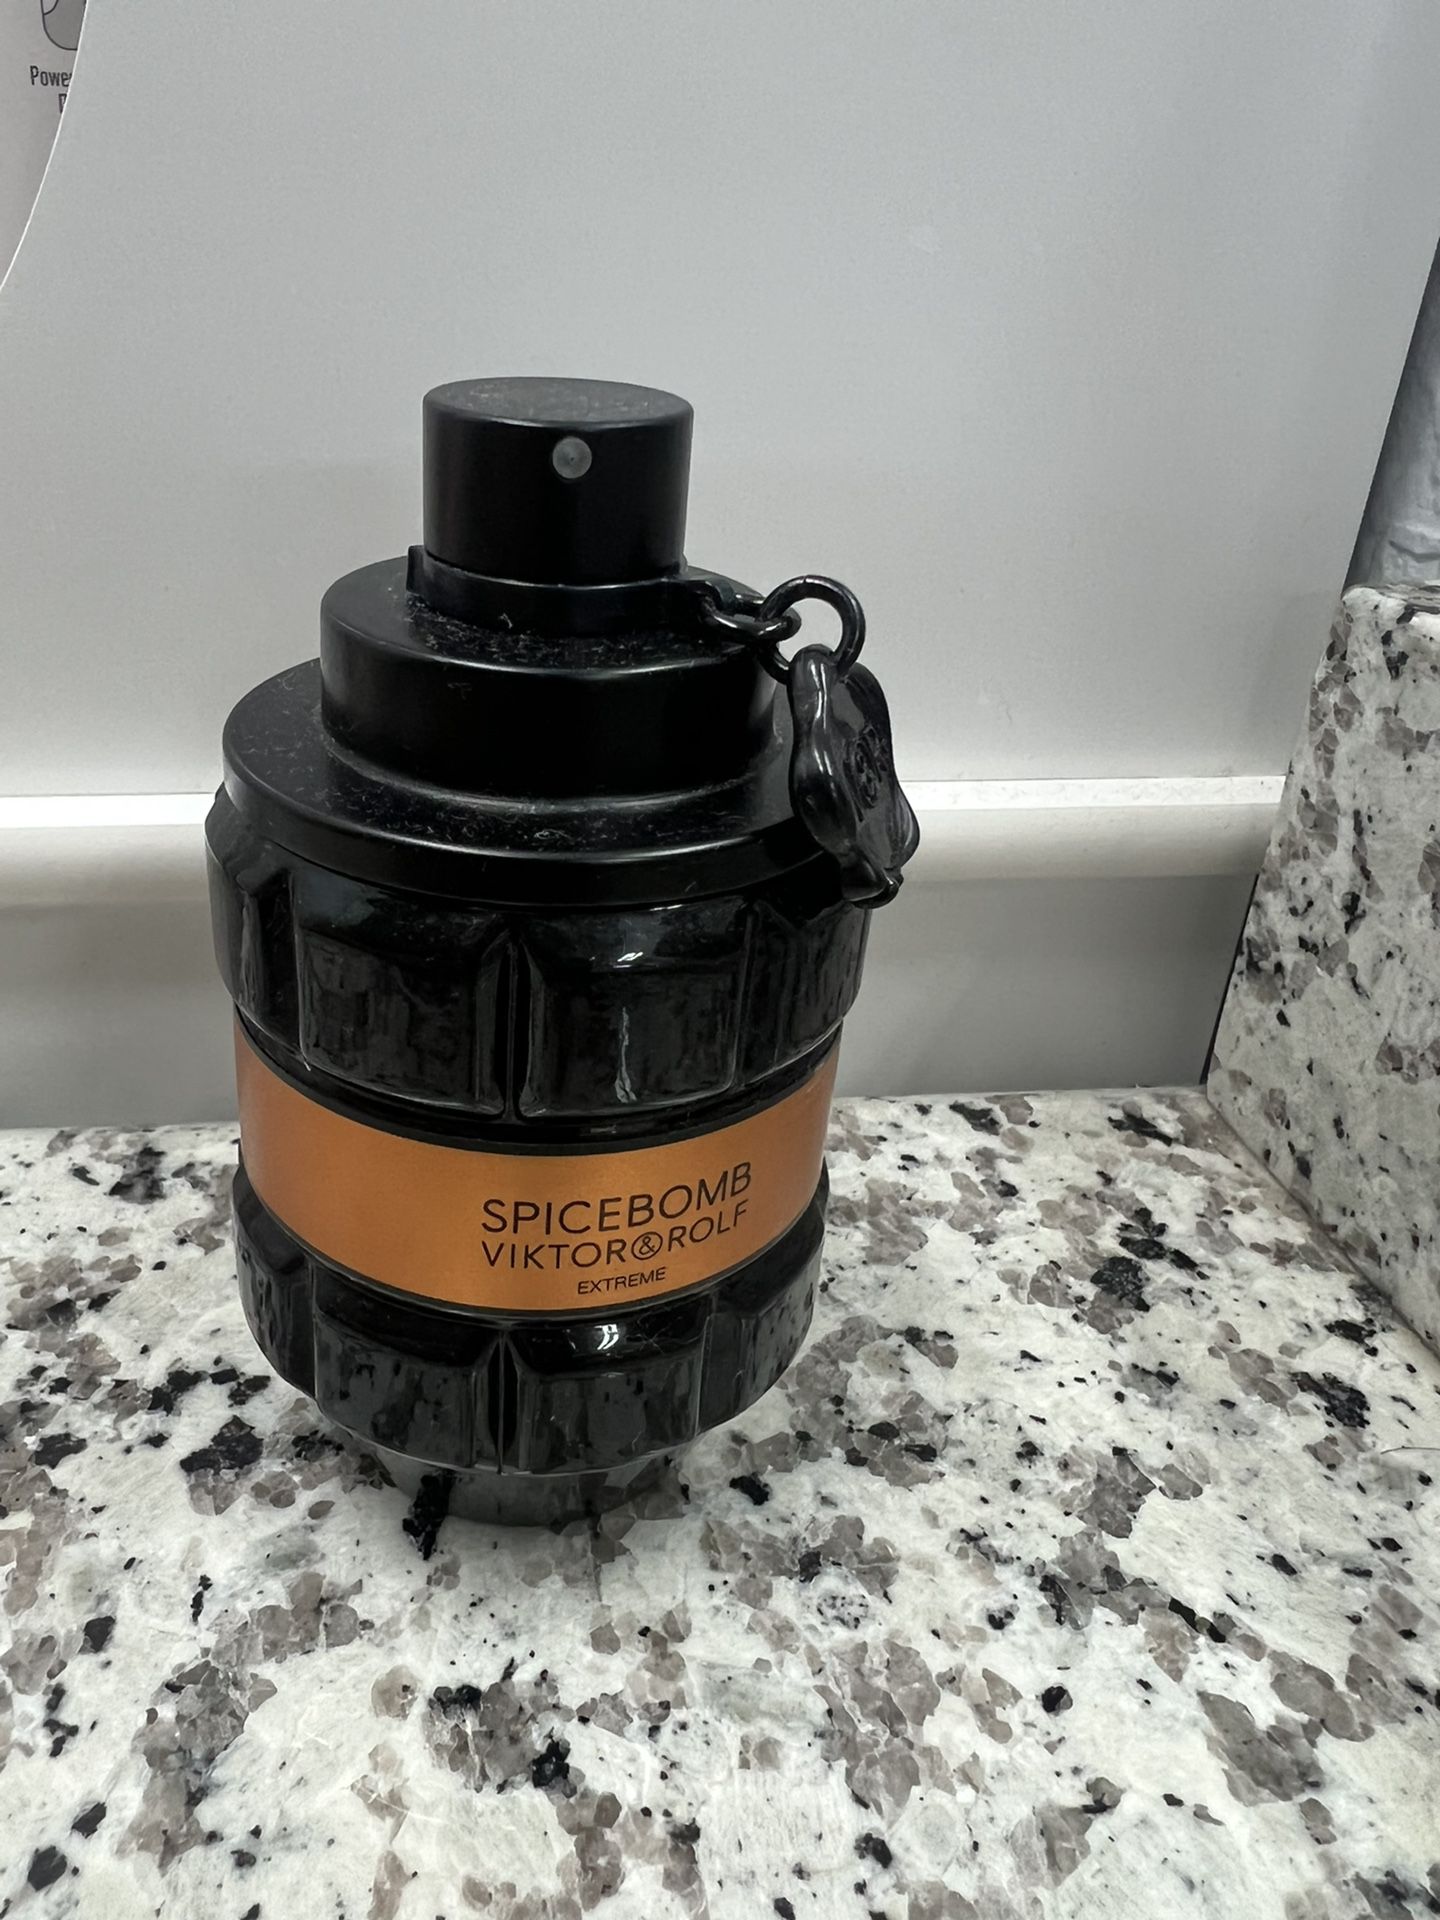 Viktor&Rolf Spicebomb Extreme 90ml Perfume for Sale in Rancho Cucamonga, CA  - OfferUp